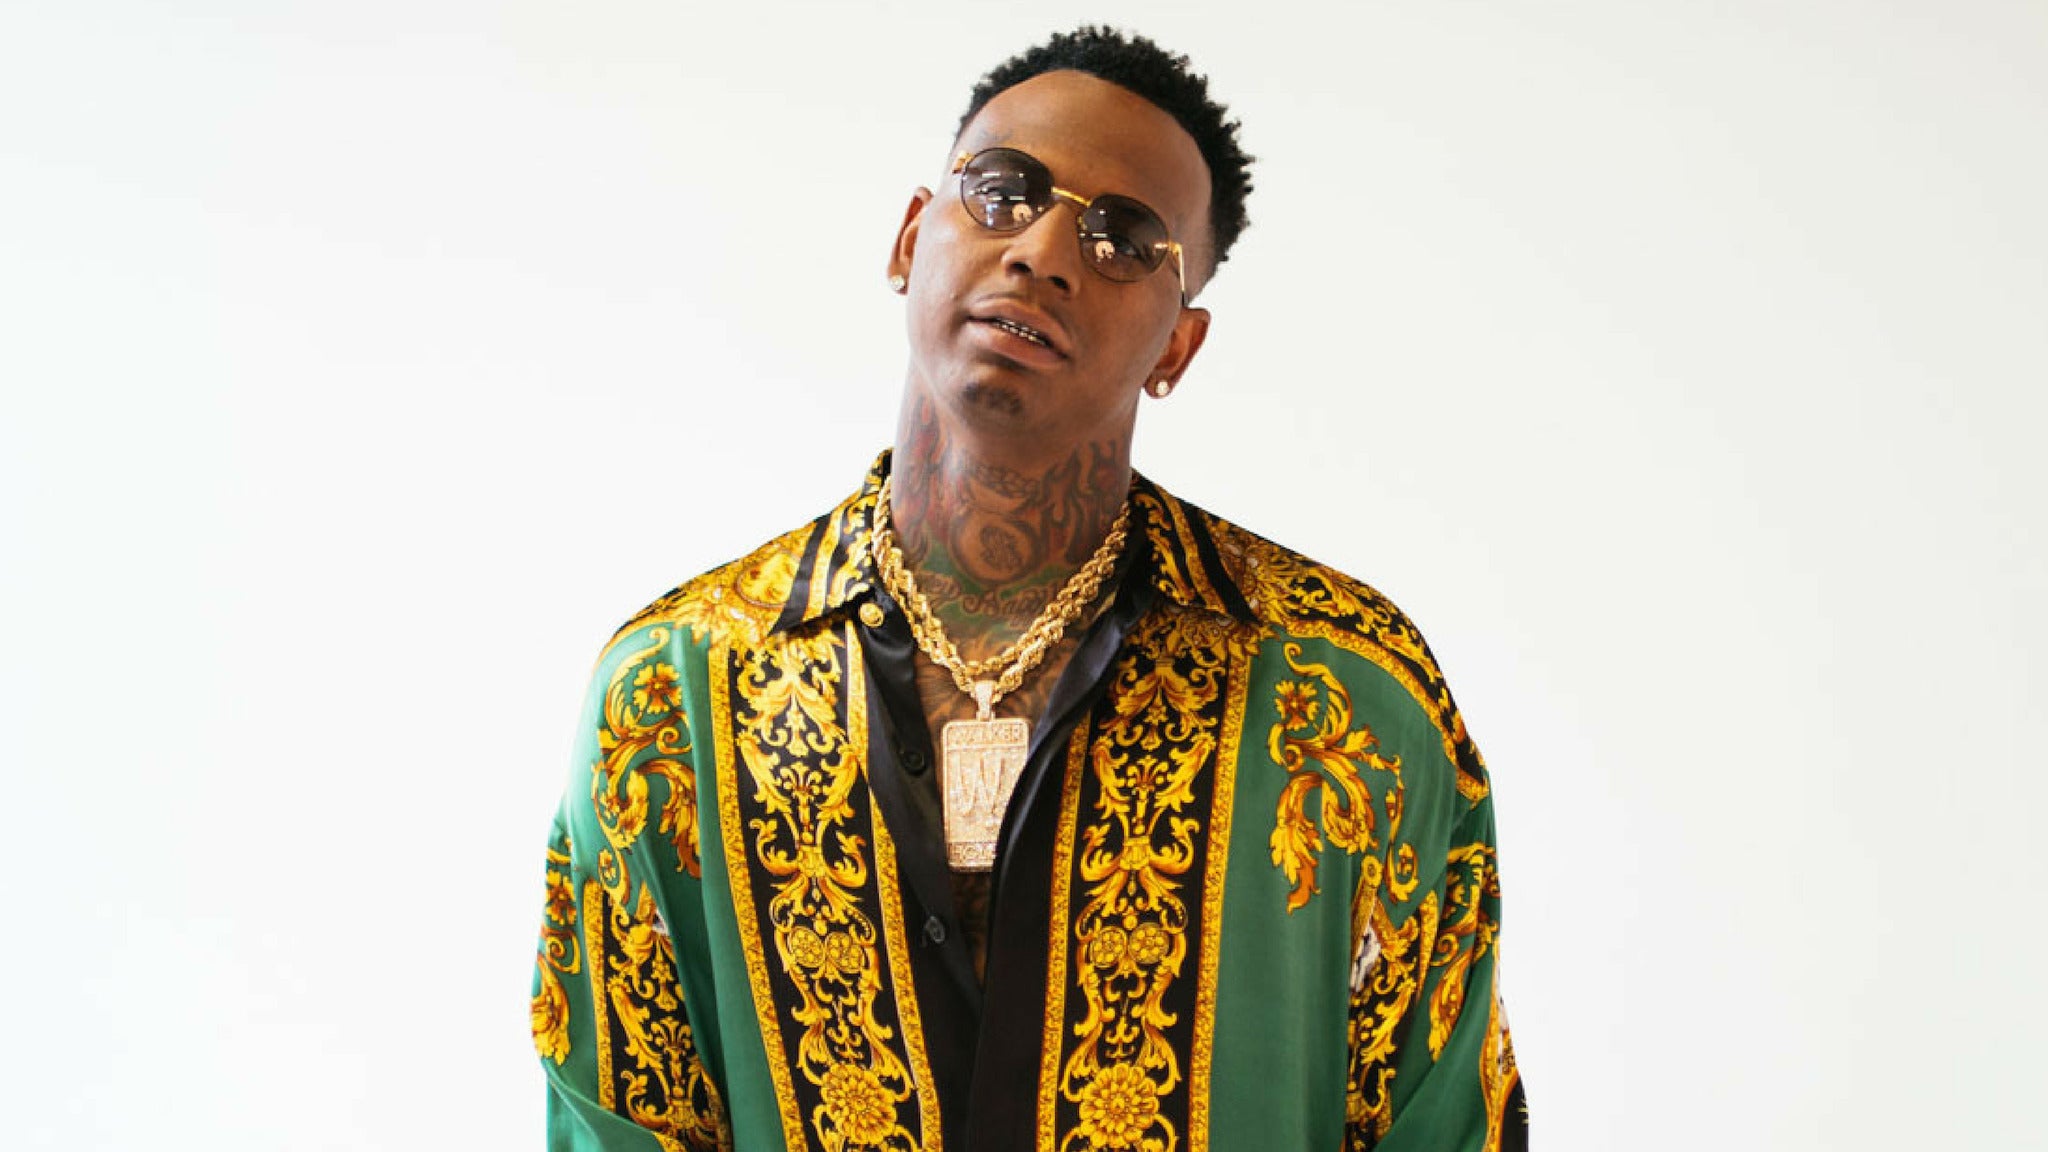 Moneybagg Yo - Word 4 Word Tour in Charlotte event information